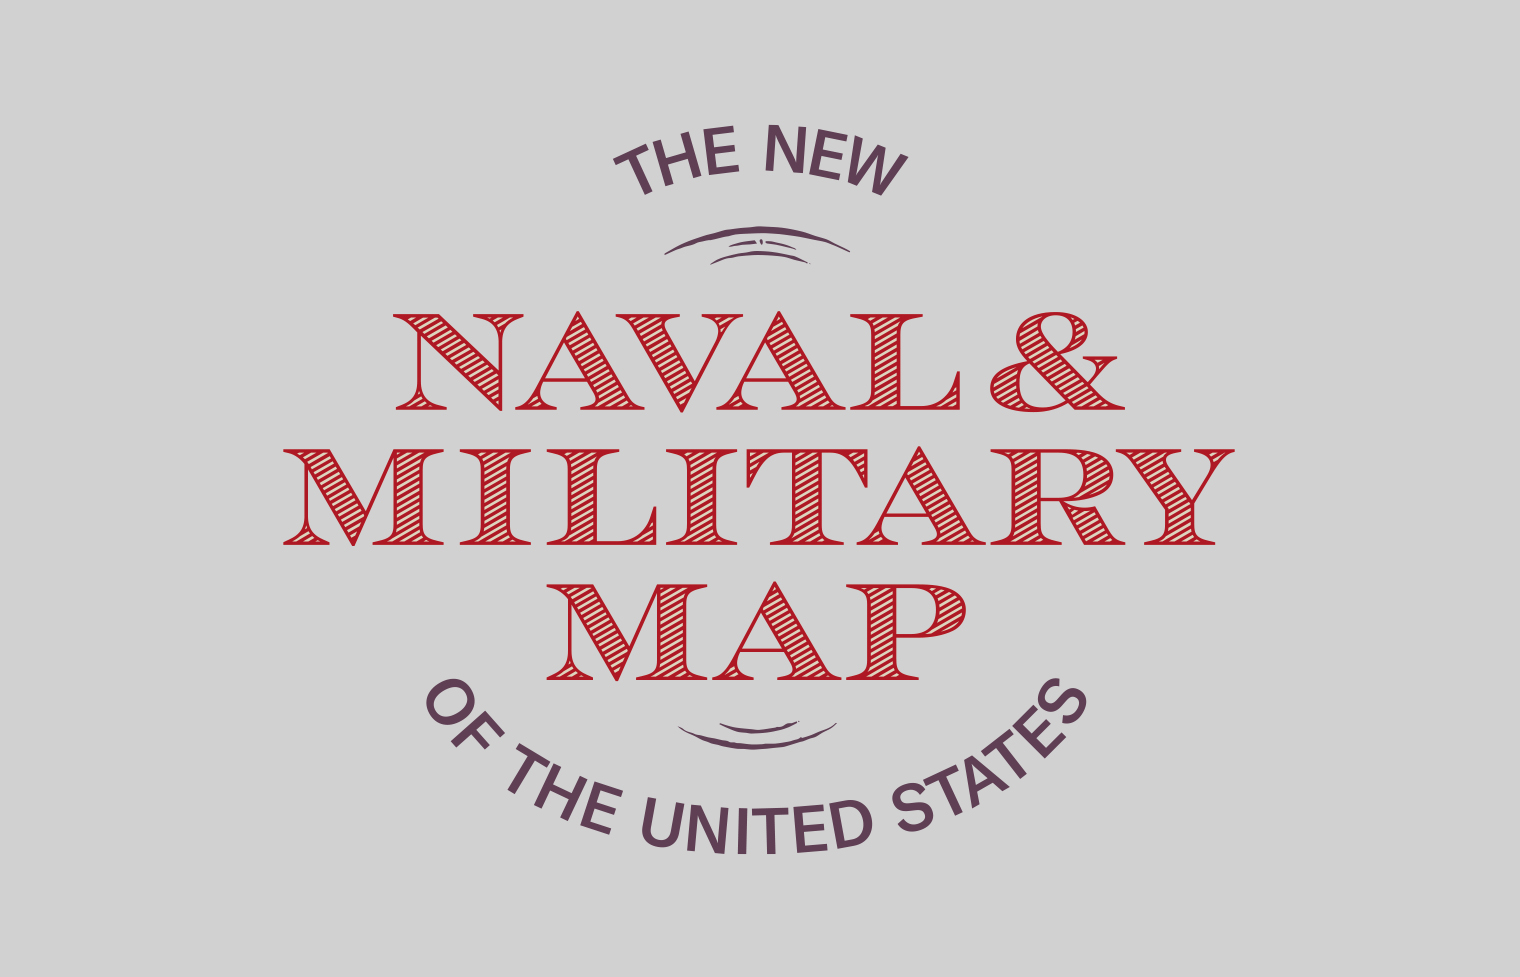 The typography of the identity reflects the typography of the Naval and Military Map itself.